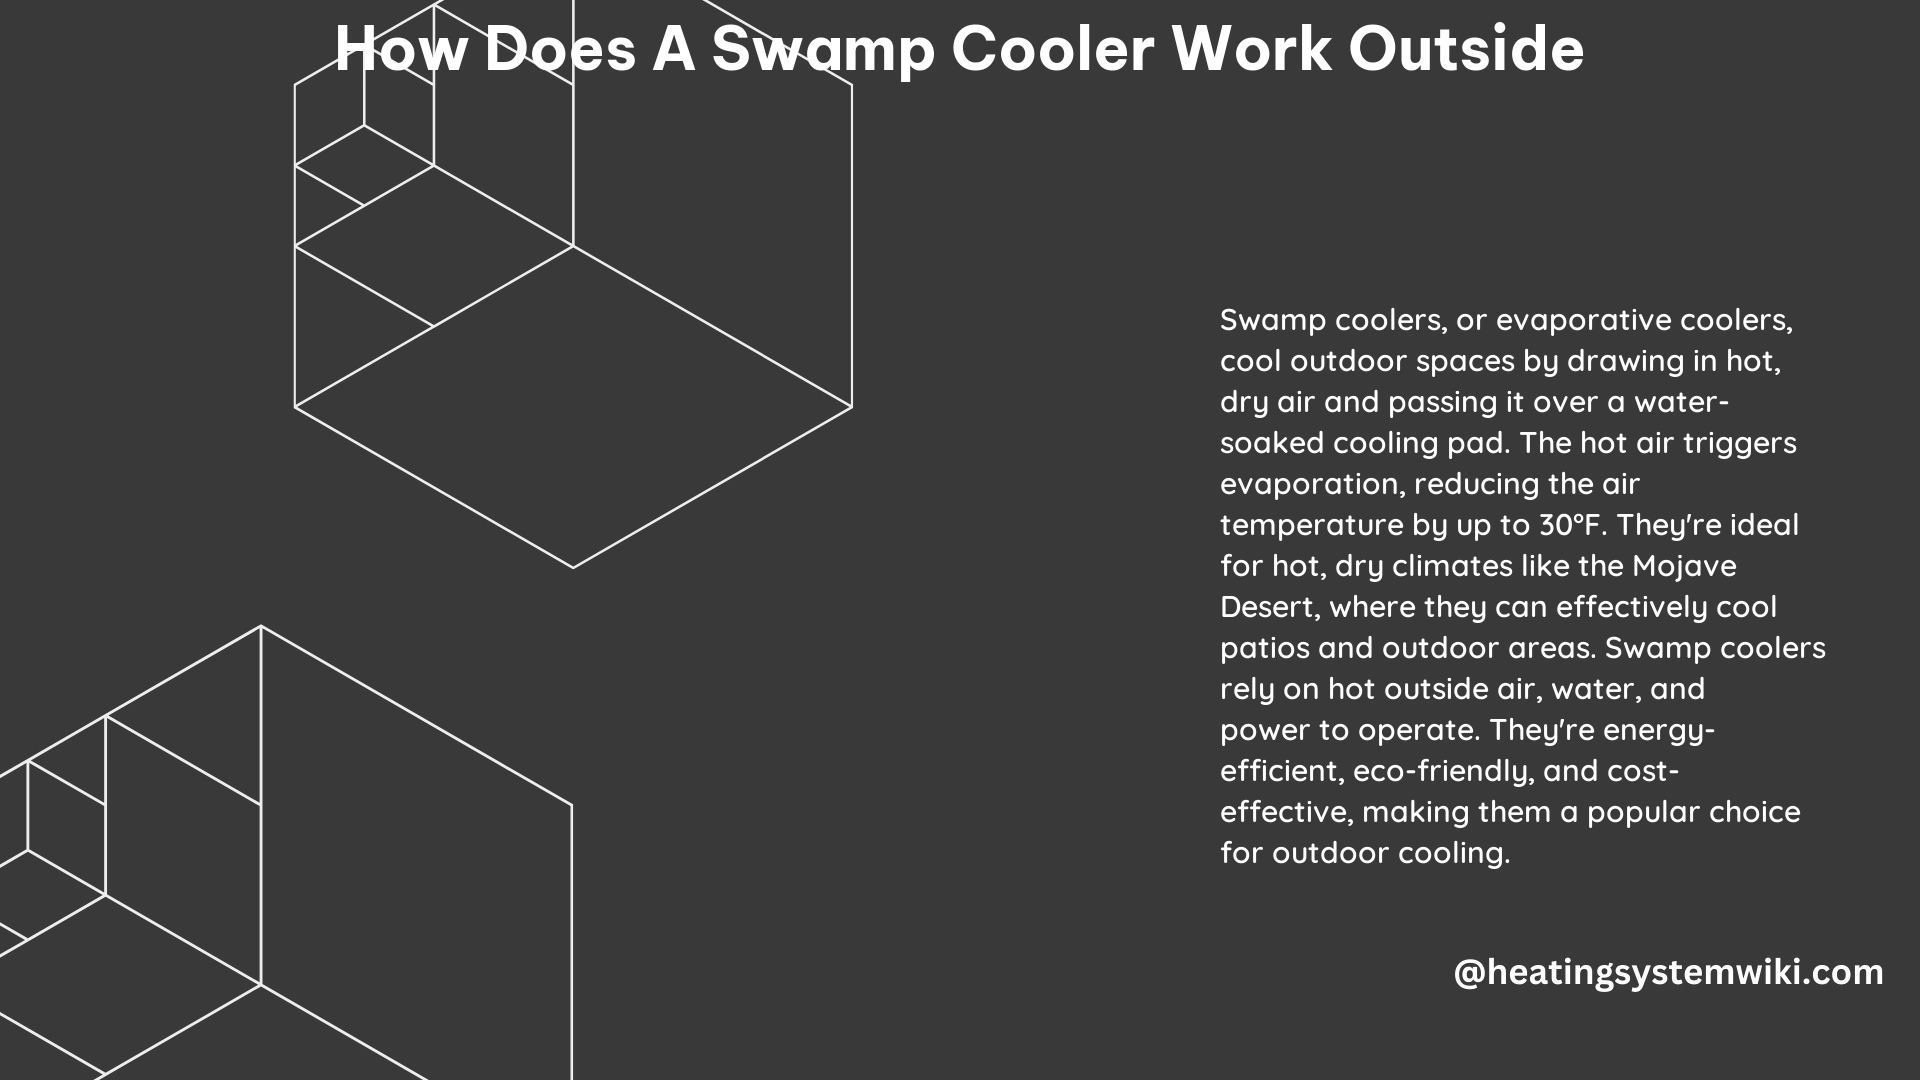 How Does a Swamp Cooler Work Outside